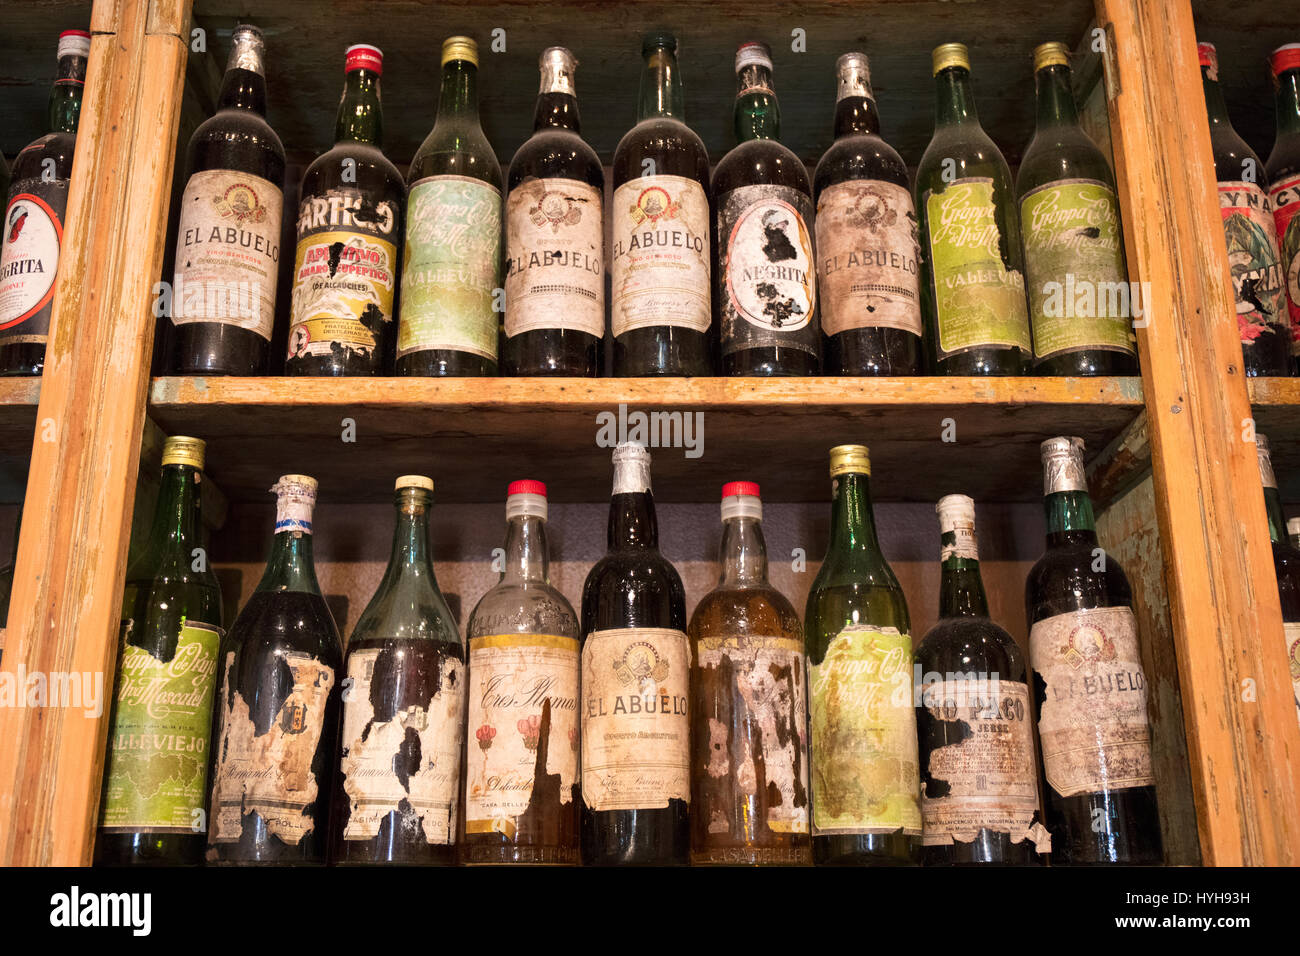 Old vintage bottles inside a bar in San Telmo. Buenos Aires, Argentina. Stock Photo